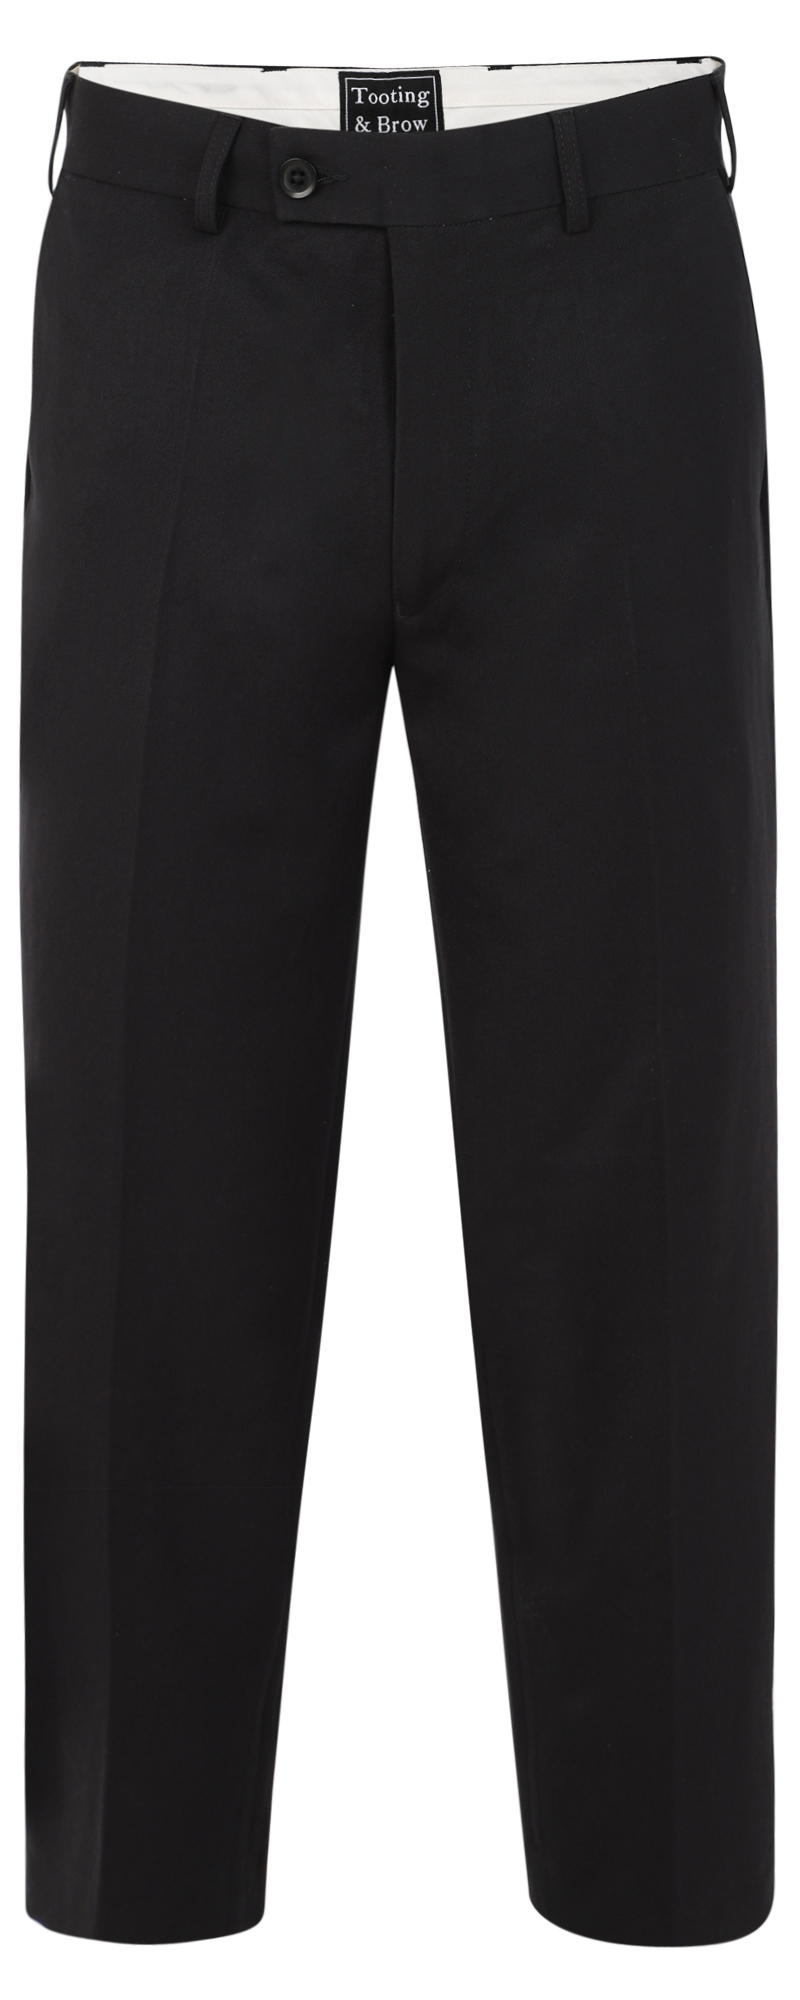 Size conversion  Mens trousers and shorts  Our Units